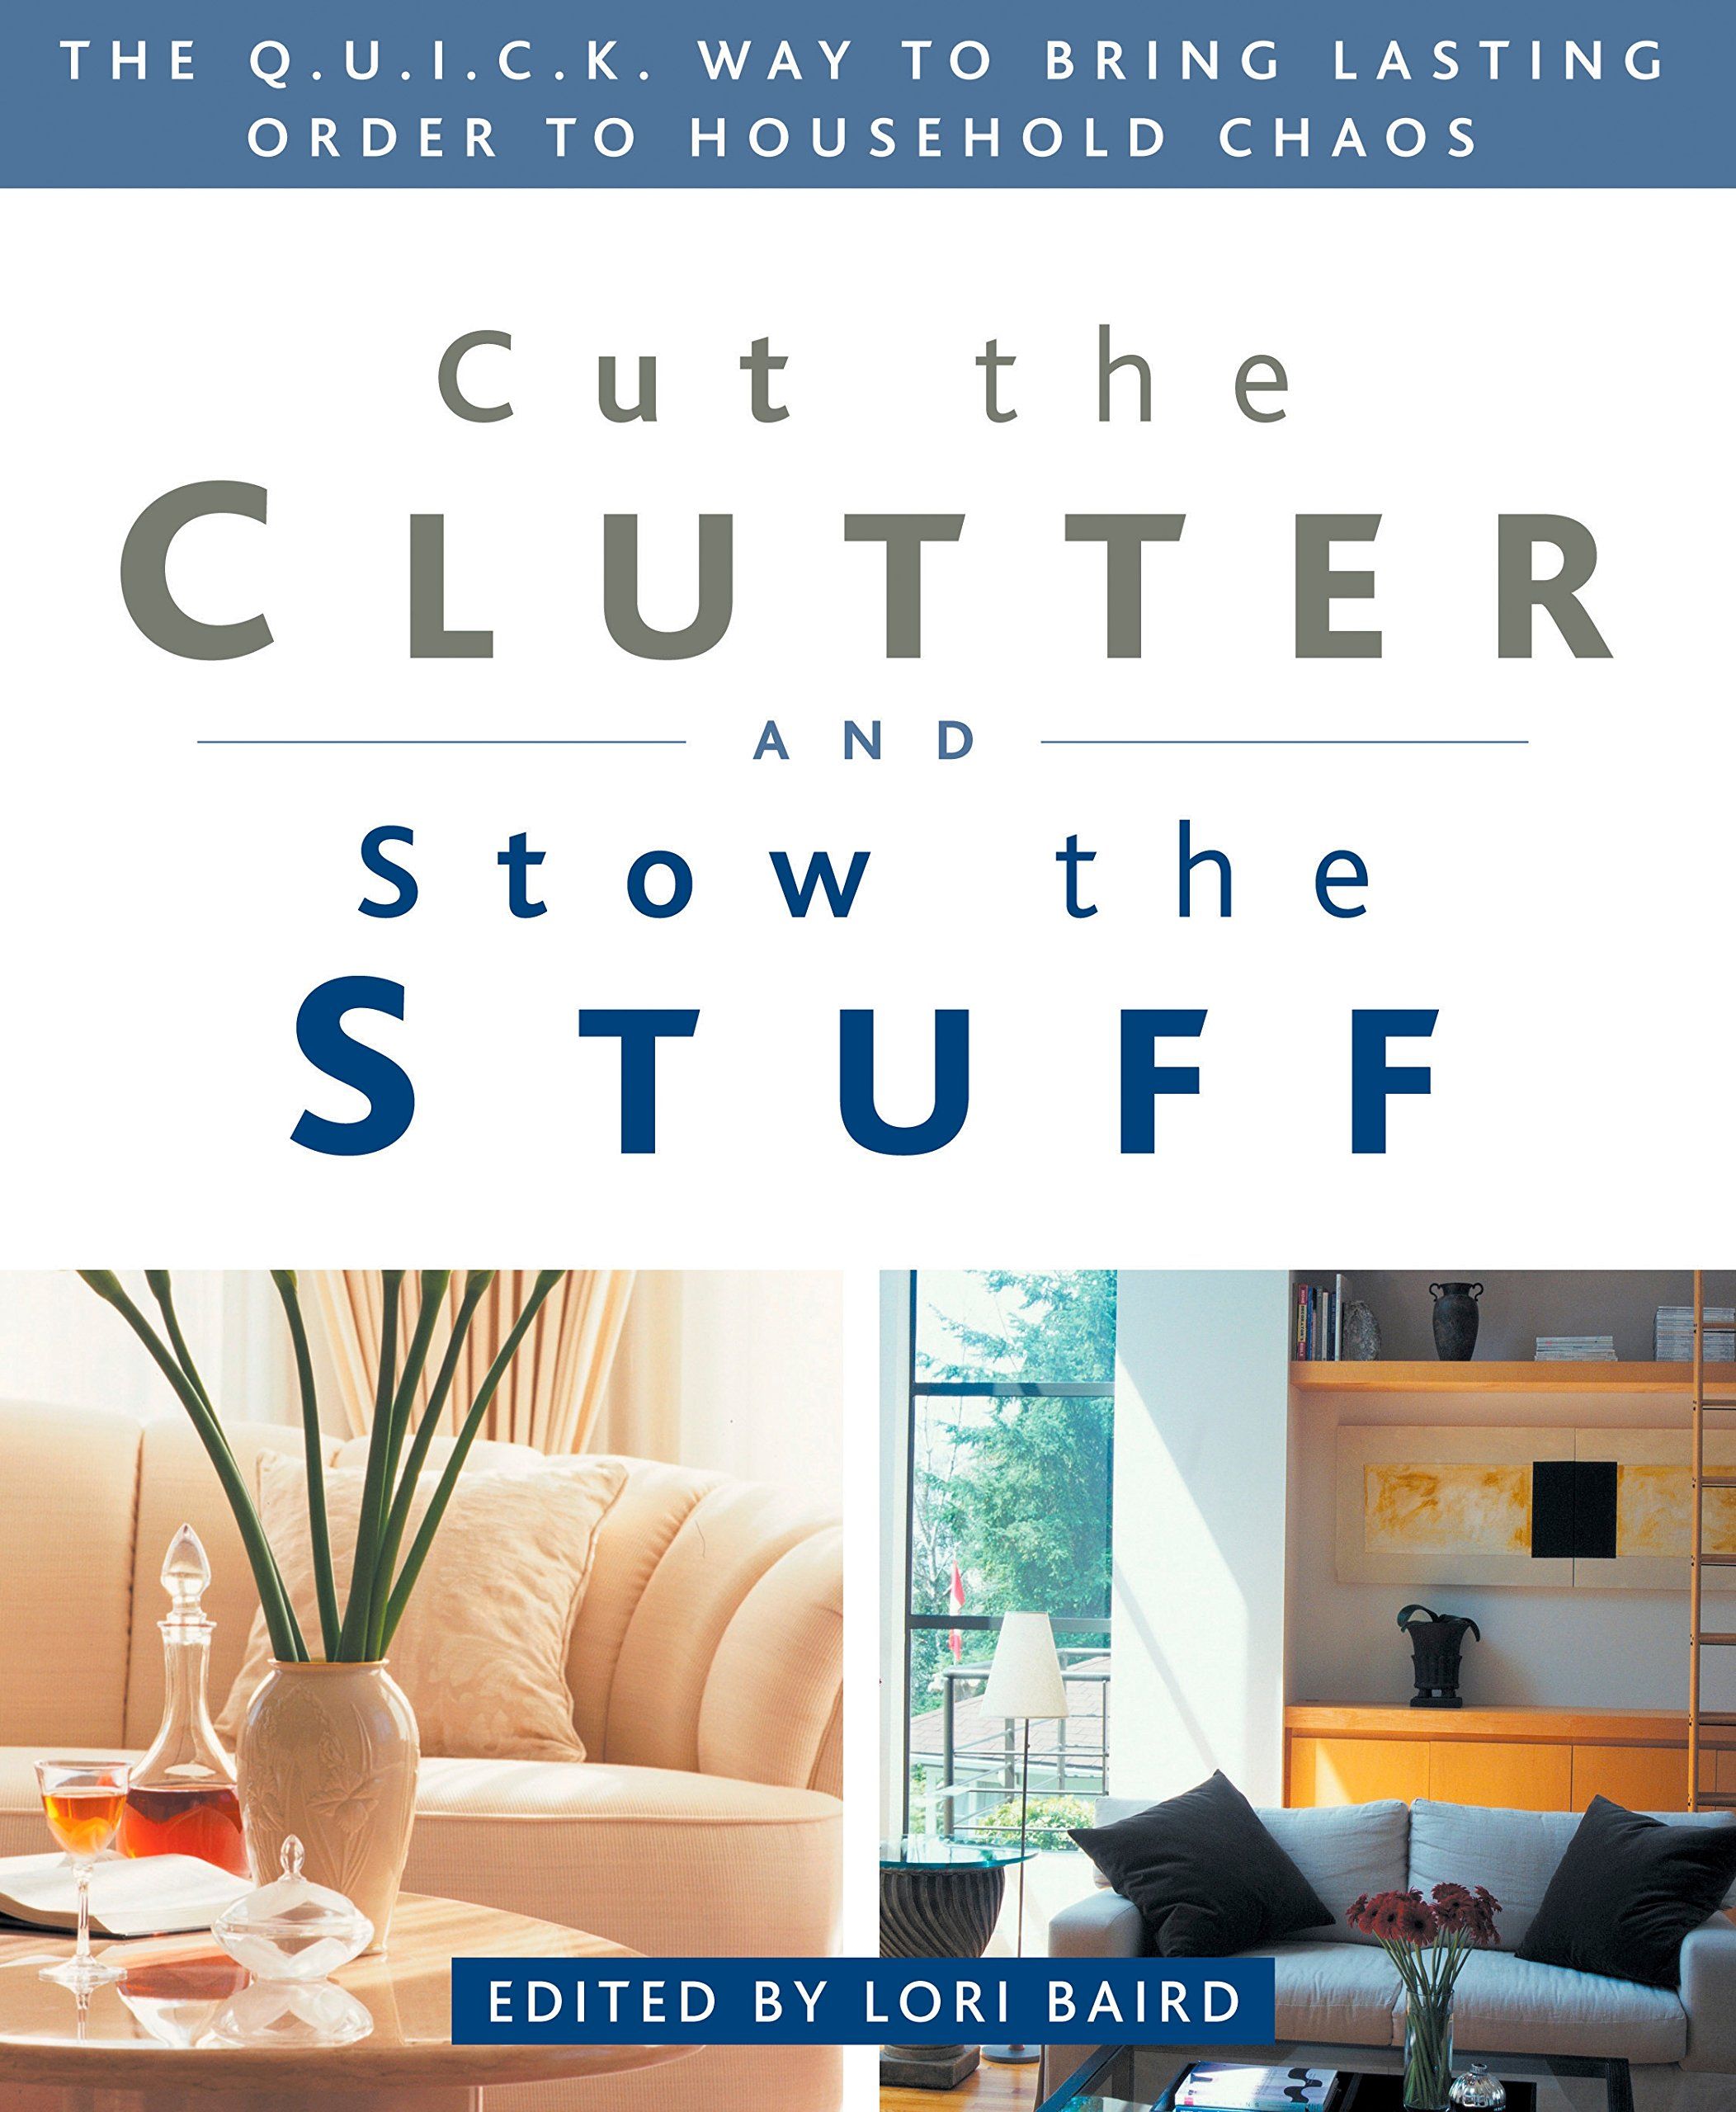 Cut The Clutter And Stow The Stuff by Lori Baird